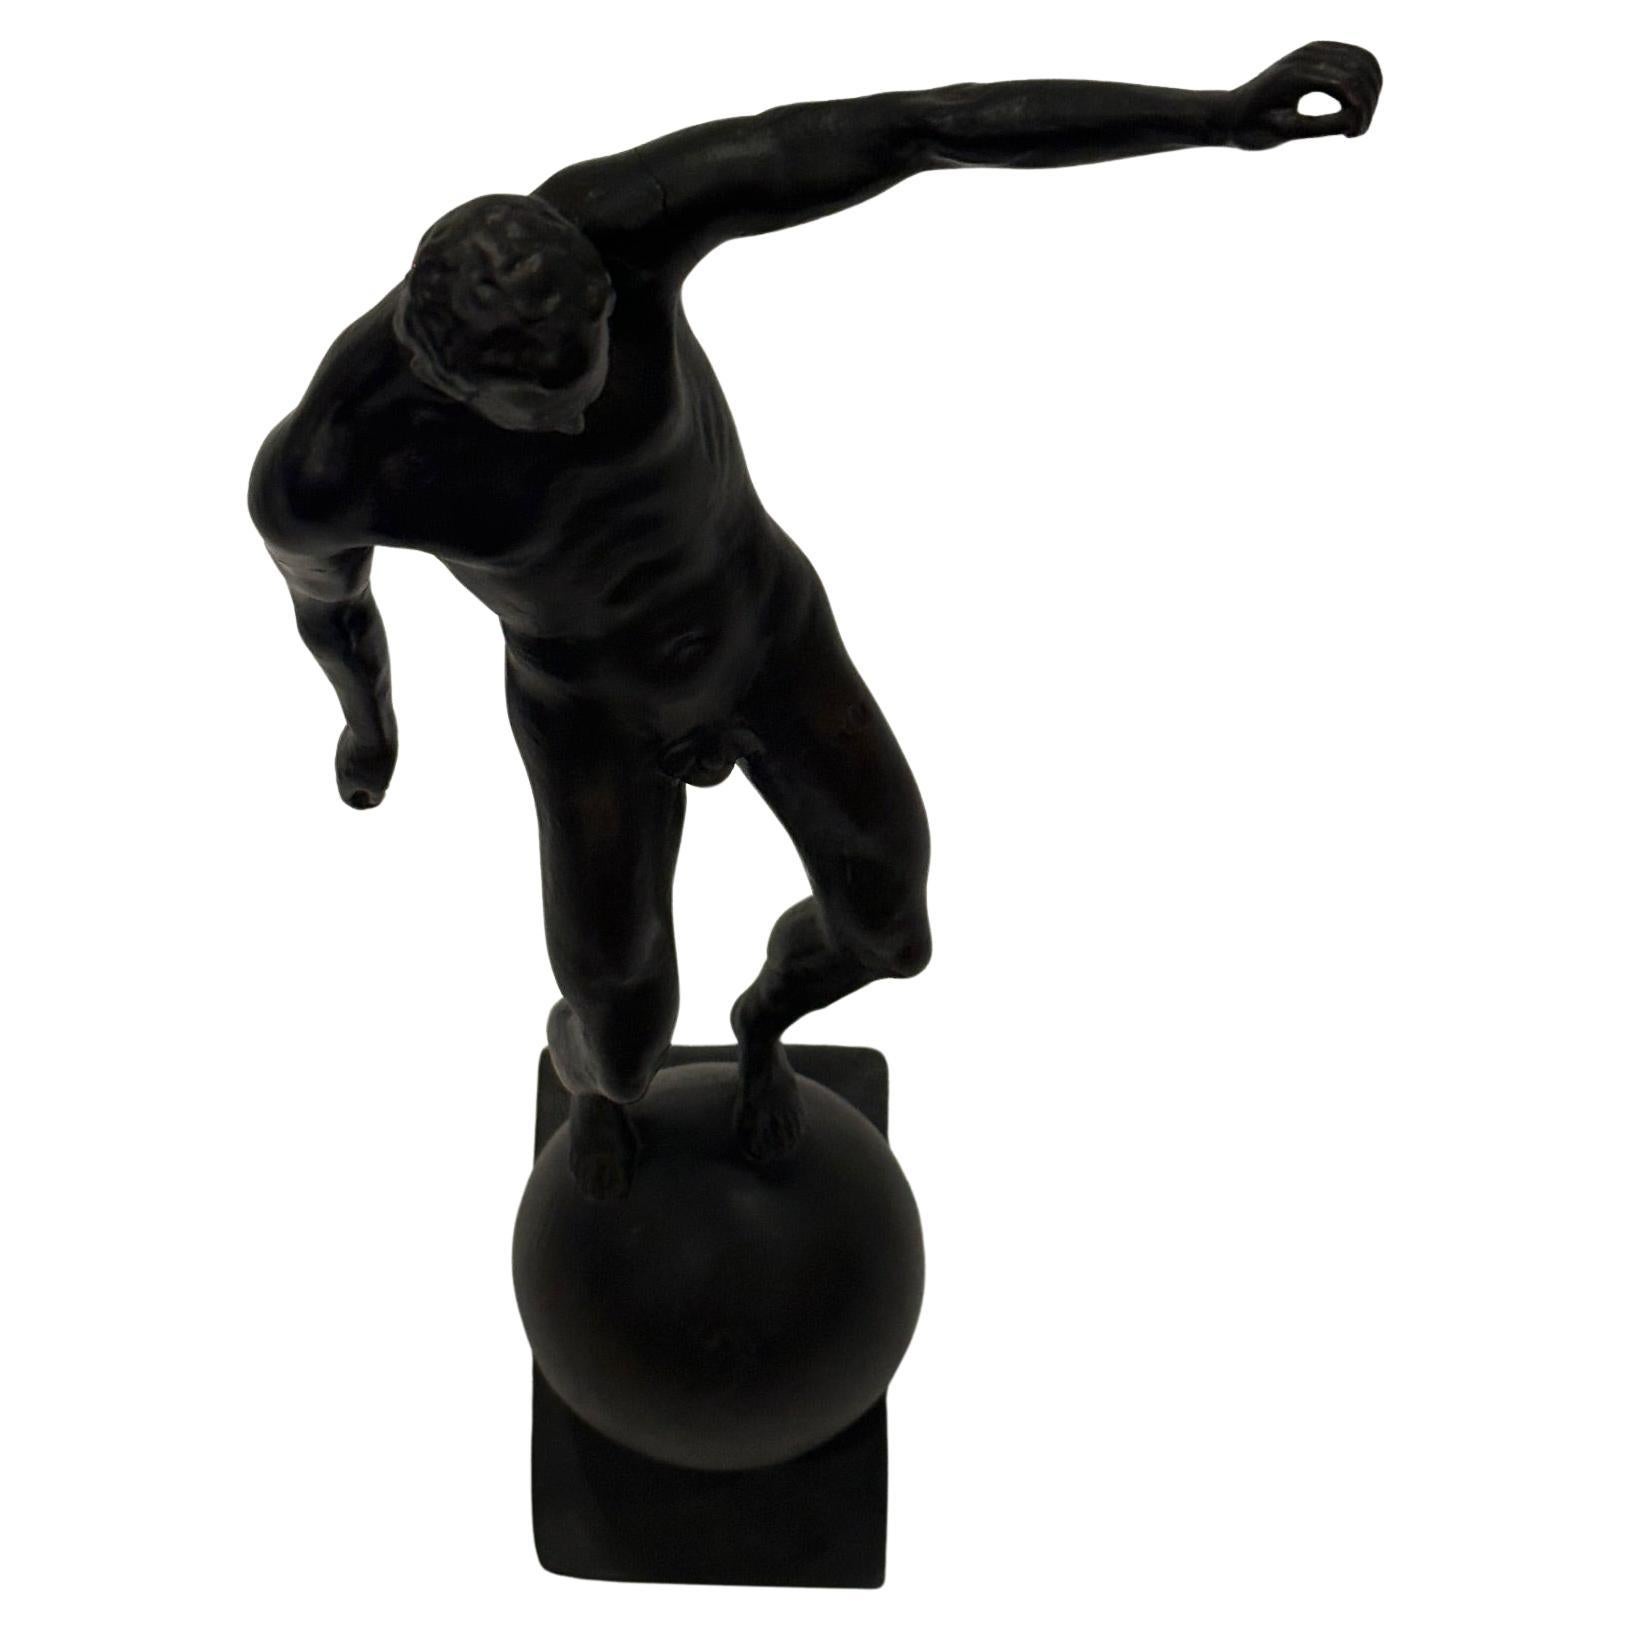 Striking classical bronze sculpture of a male nude standing on a ball having incredible attention to detail and marvelous gesture.